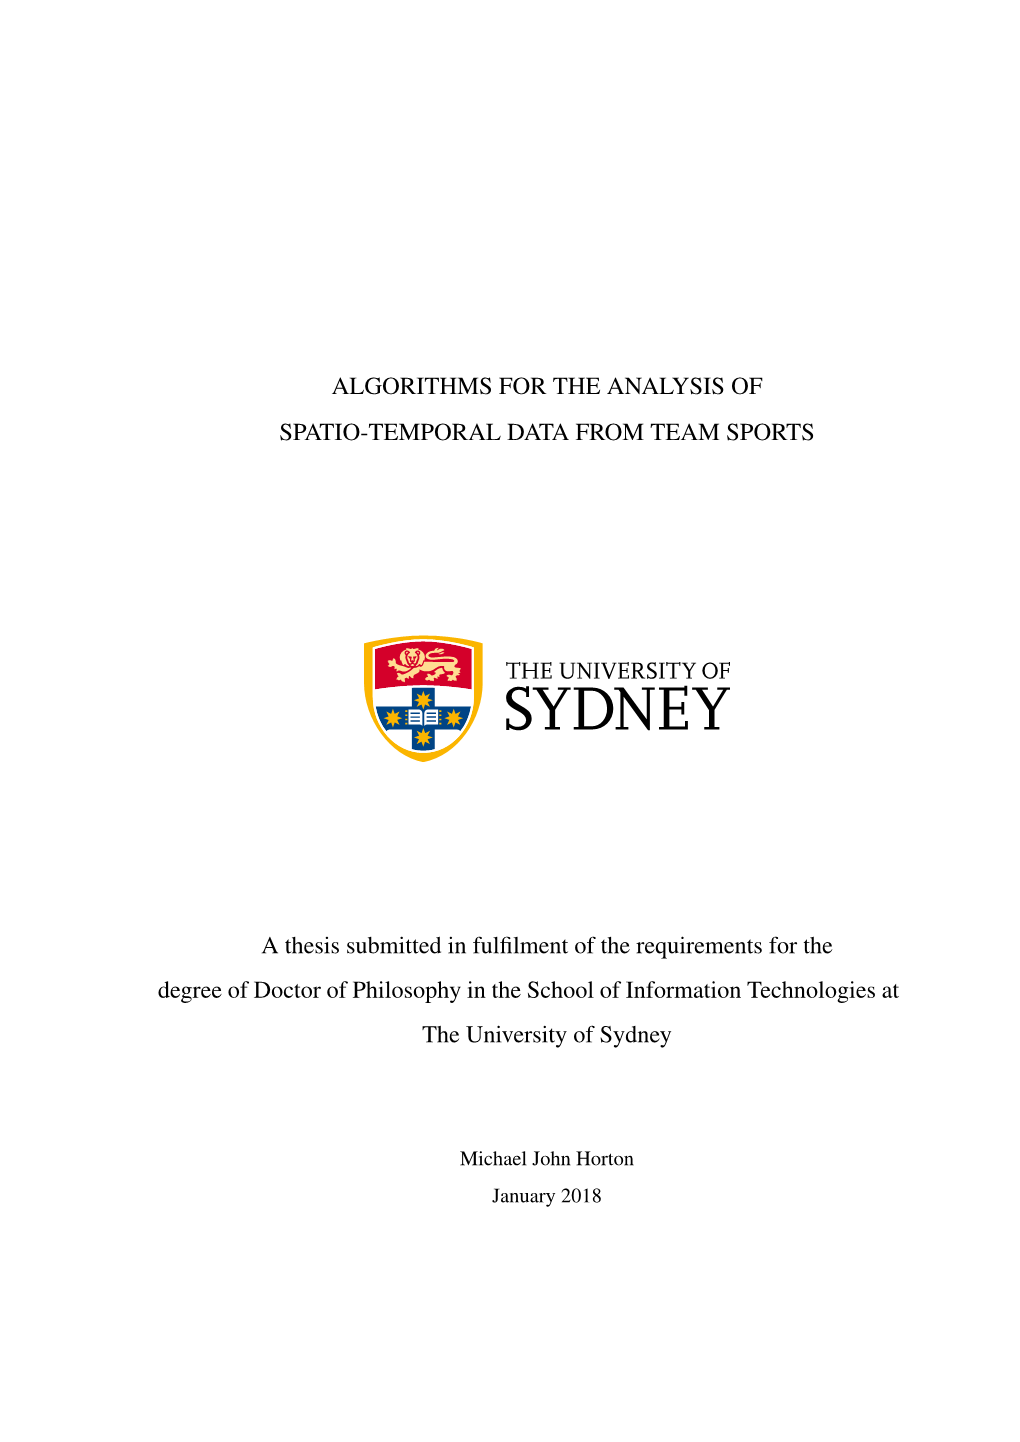 ALGORITHMS for the ANALYSIS of SPATIO-TEMPORAL DATA from TEAM SPORTS a Thesis Submitted in Fulfilment of the Requirements for Th